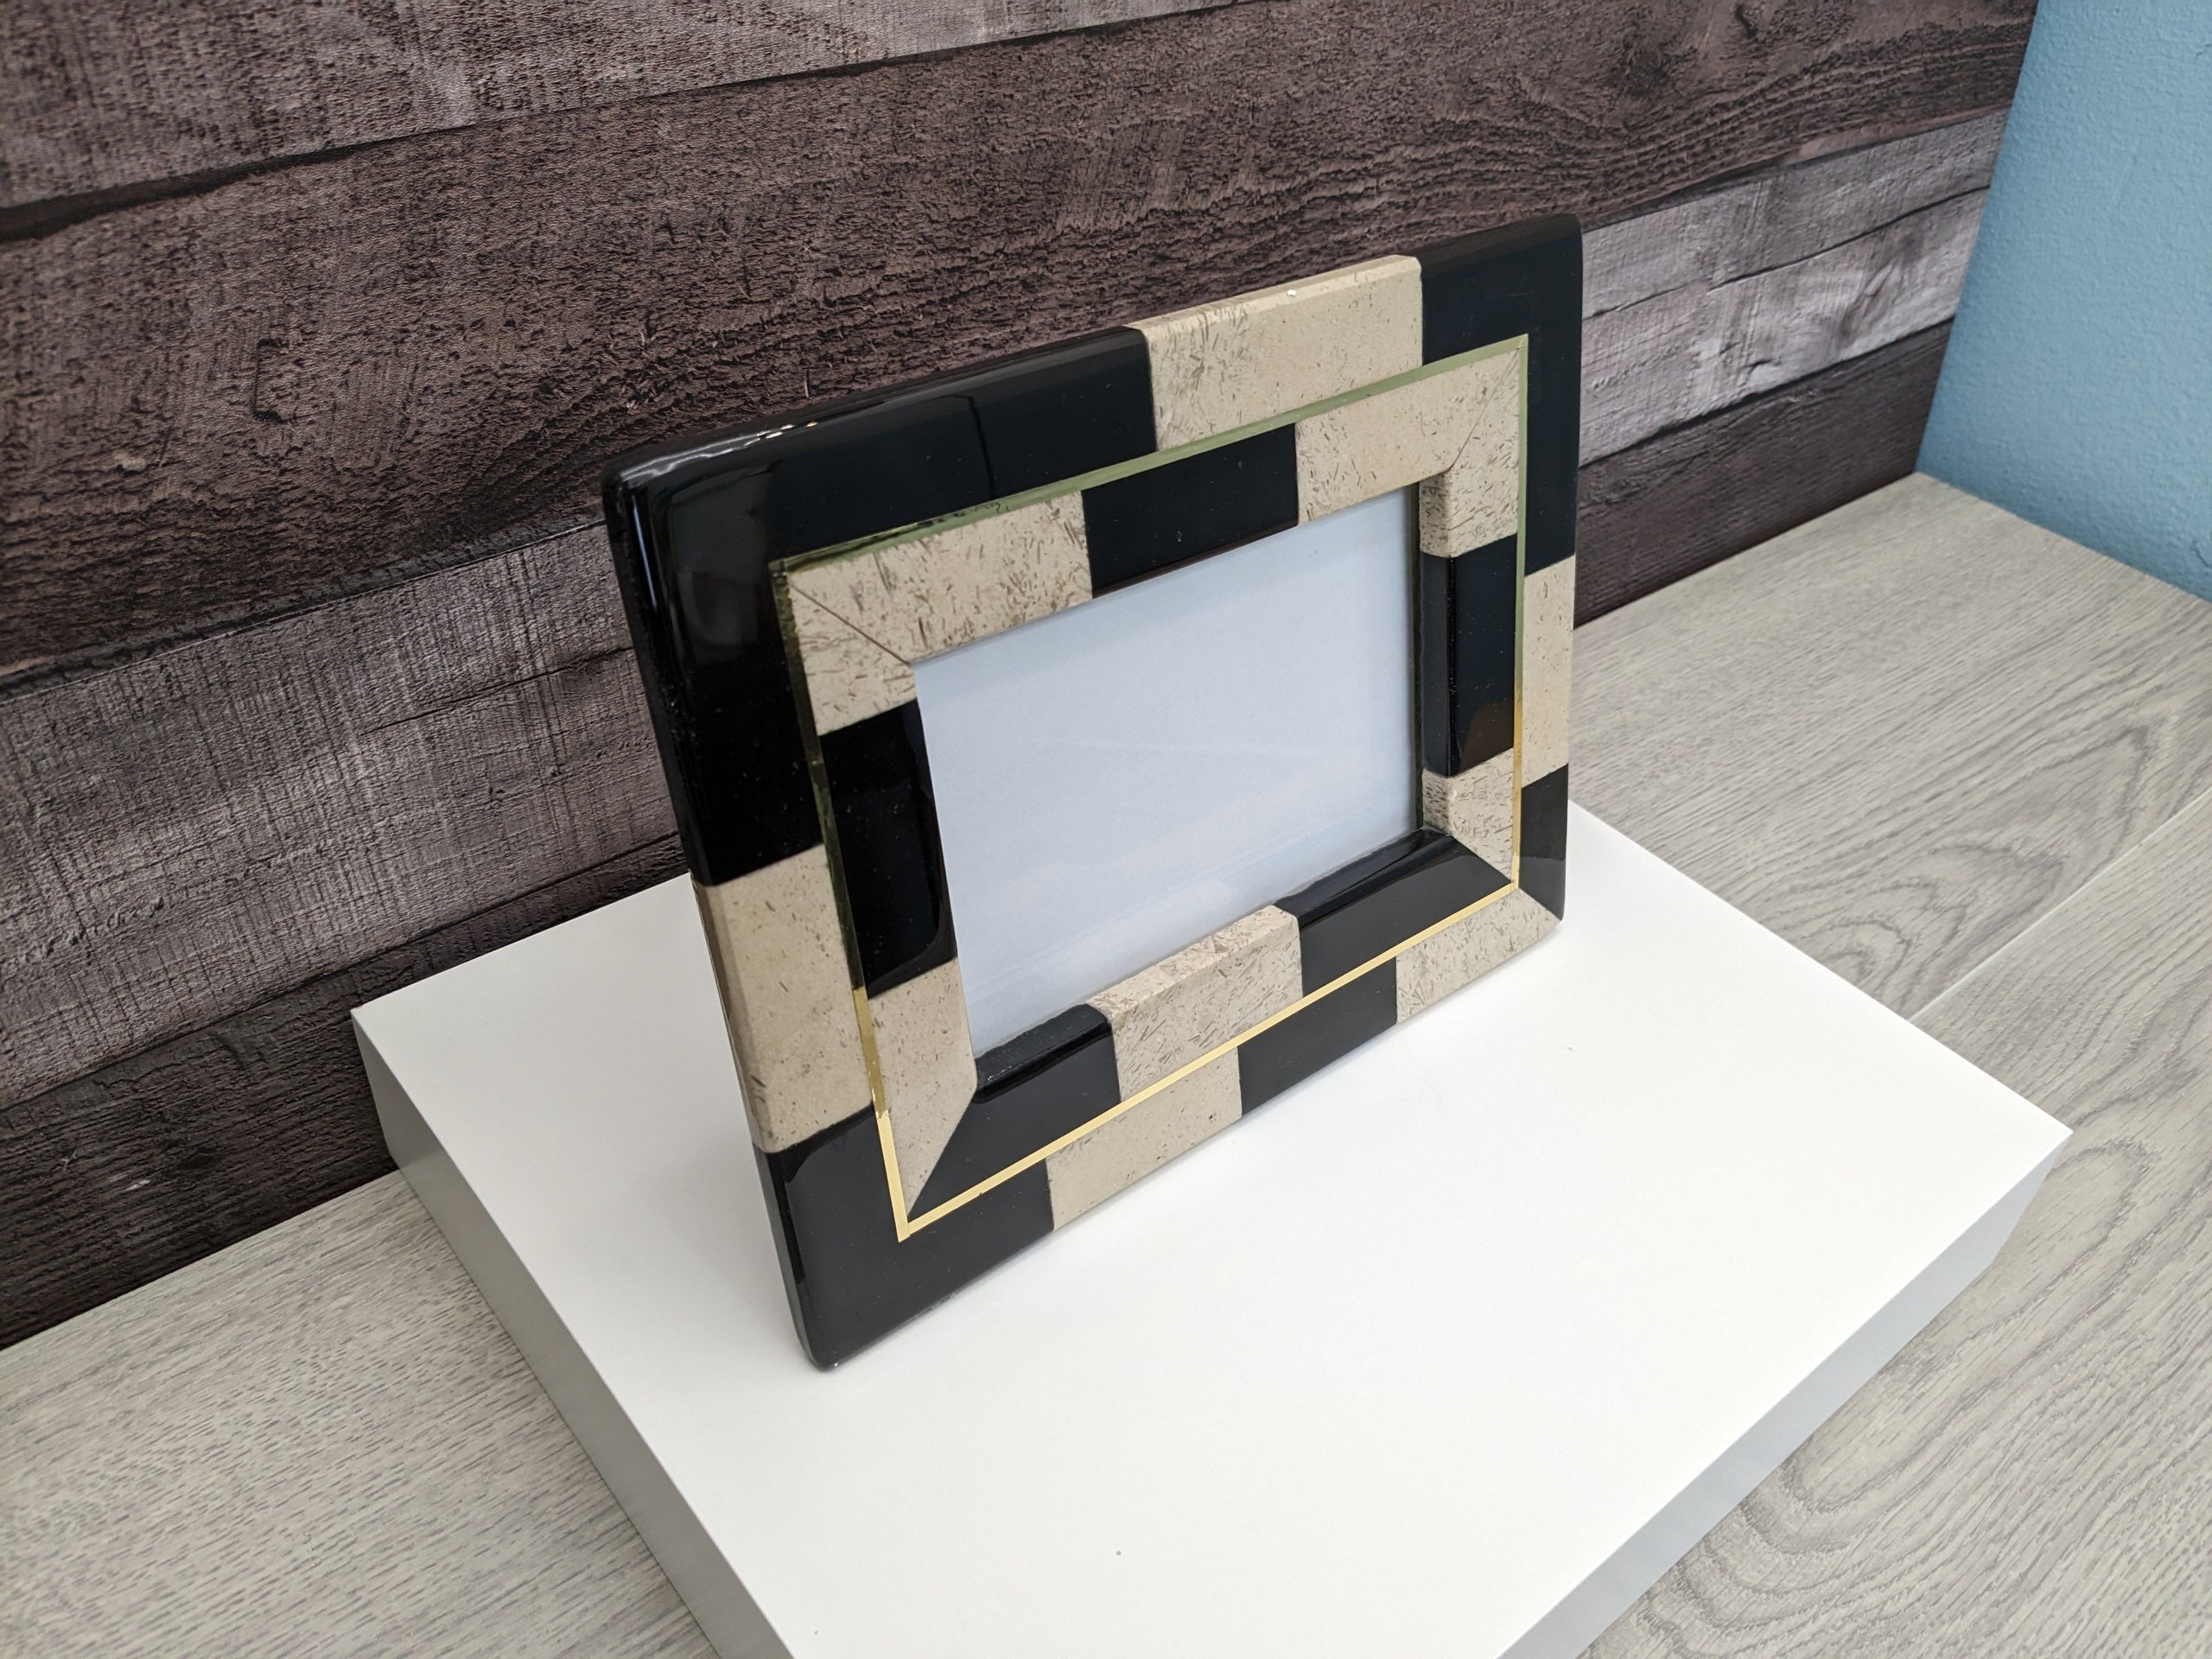 Black and Tan Check Pattern Onyx Frame with Gold Thin Line and Glass Covering. Travertine Stone Stand. Handmade in Mexico. We package and ship from the USA. Buy now at www.felipeandgrace.com.